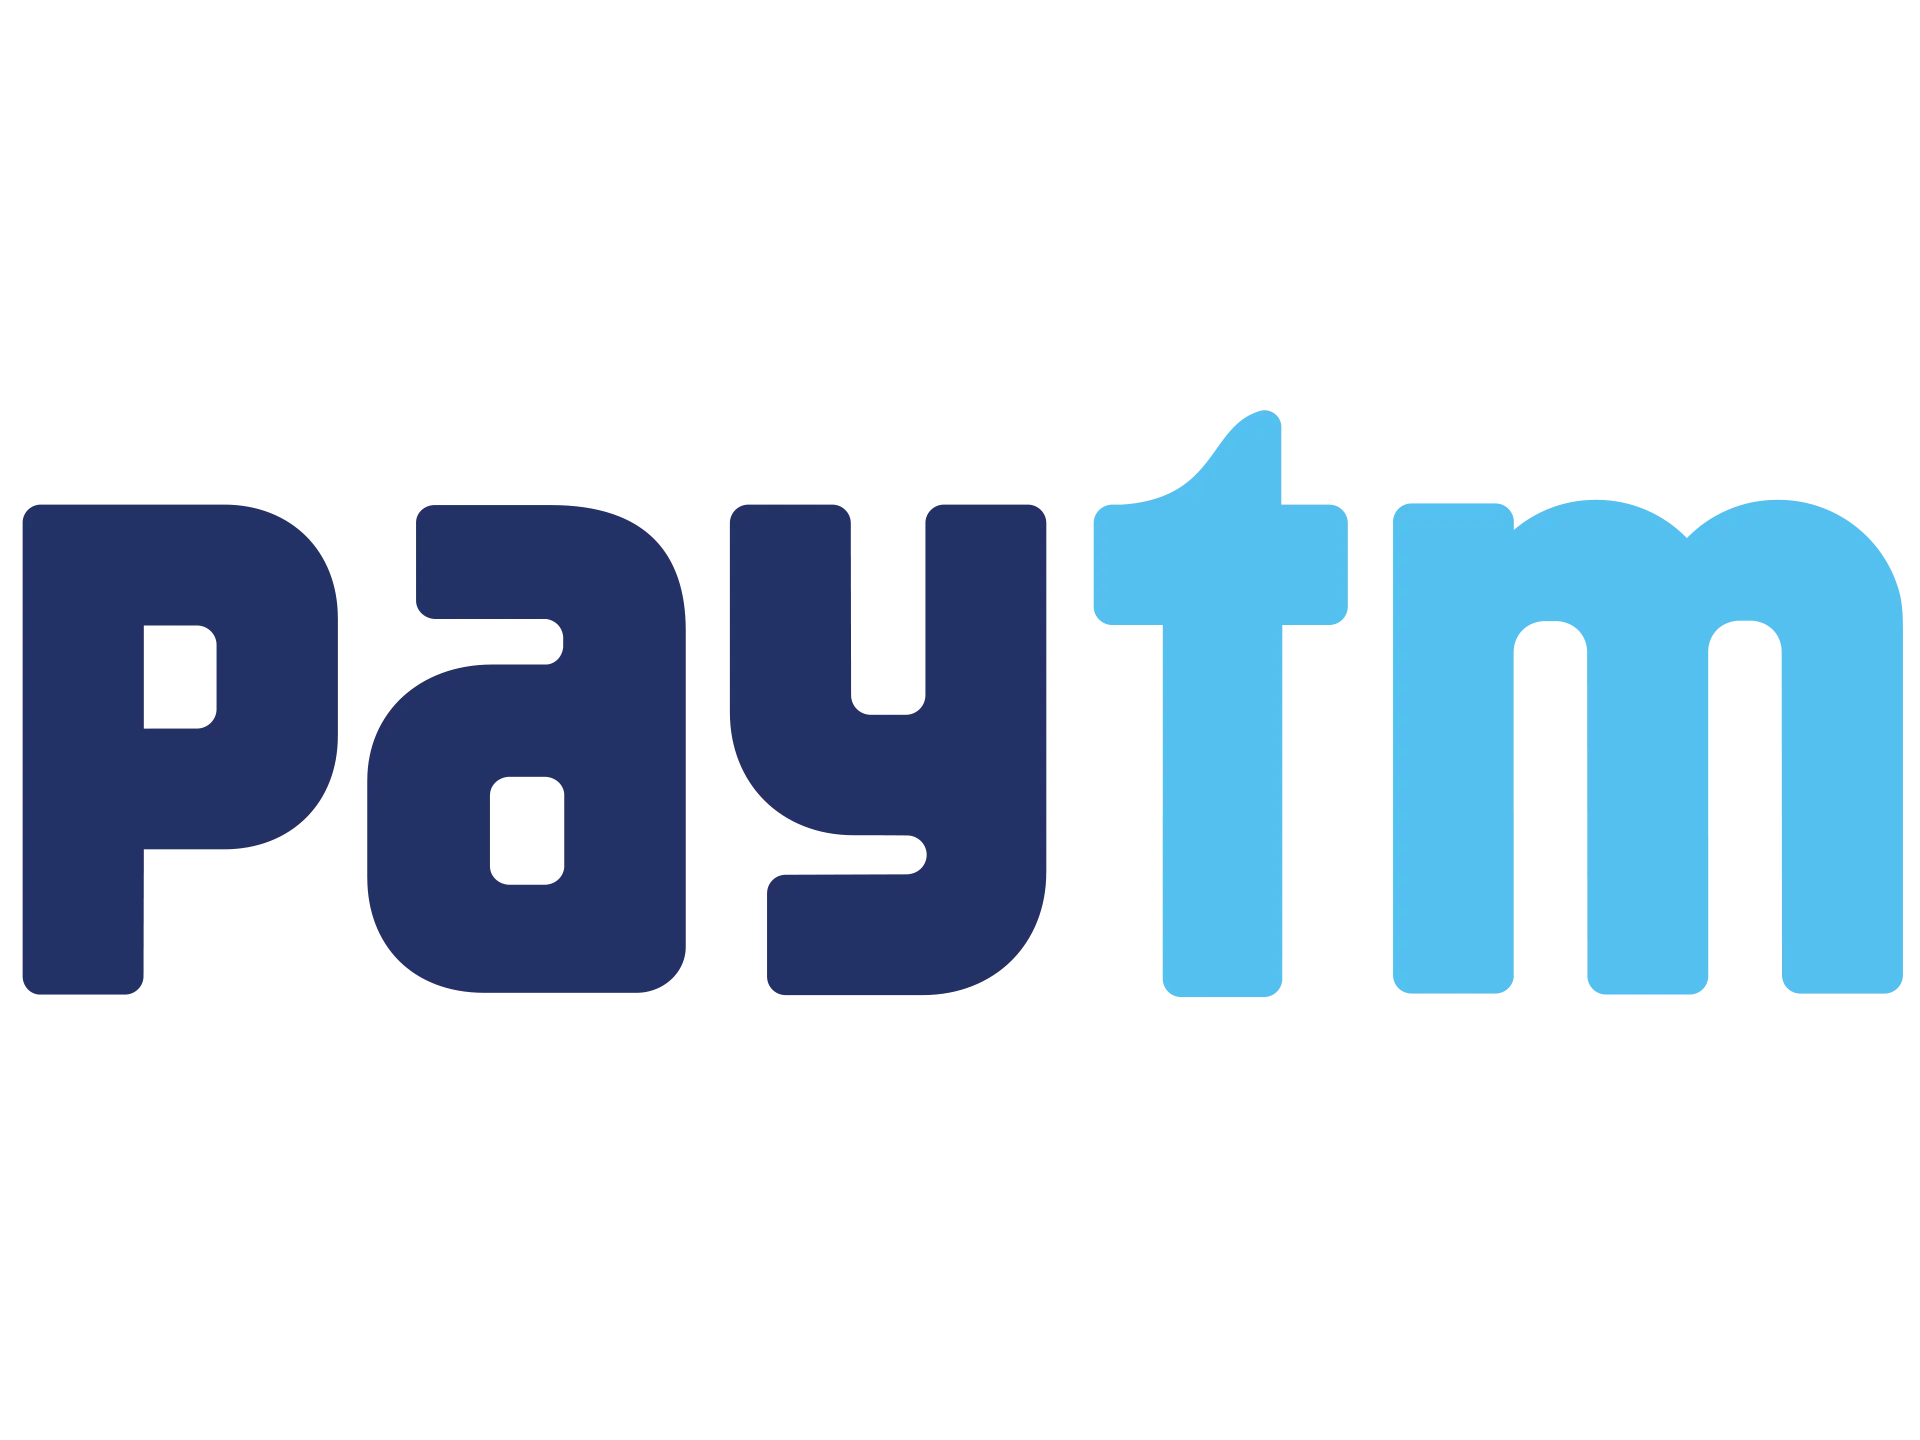 PayTM, an Indian fintech company, offers digital payments and financial services through its e-wallet, starting in 2010.